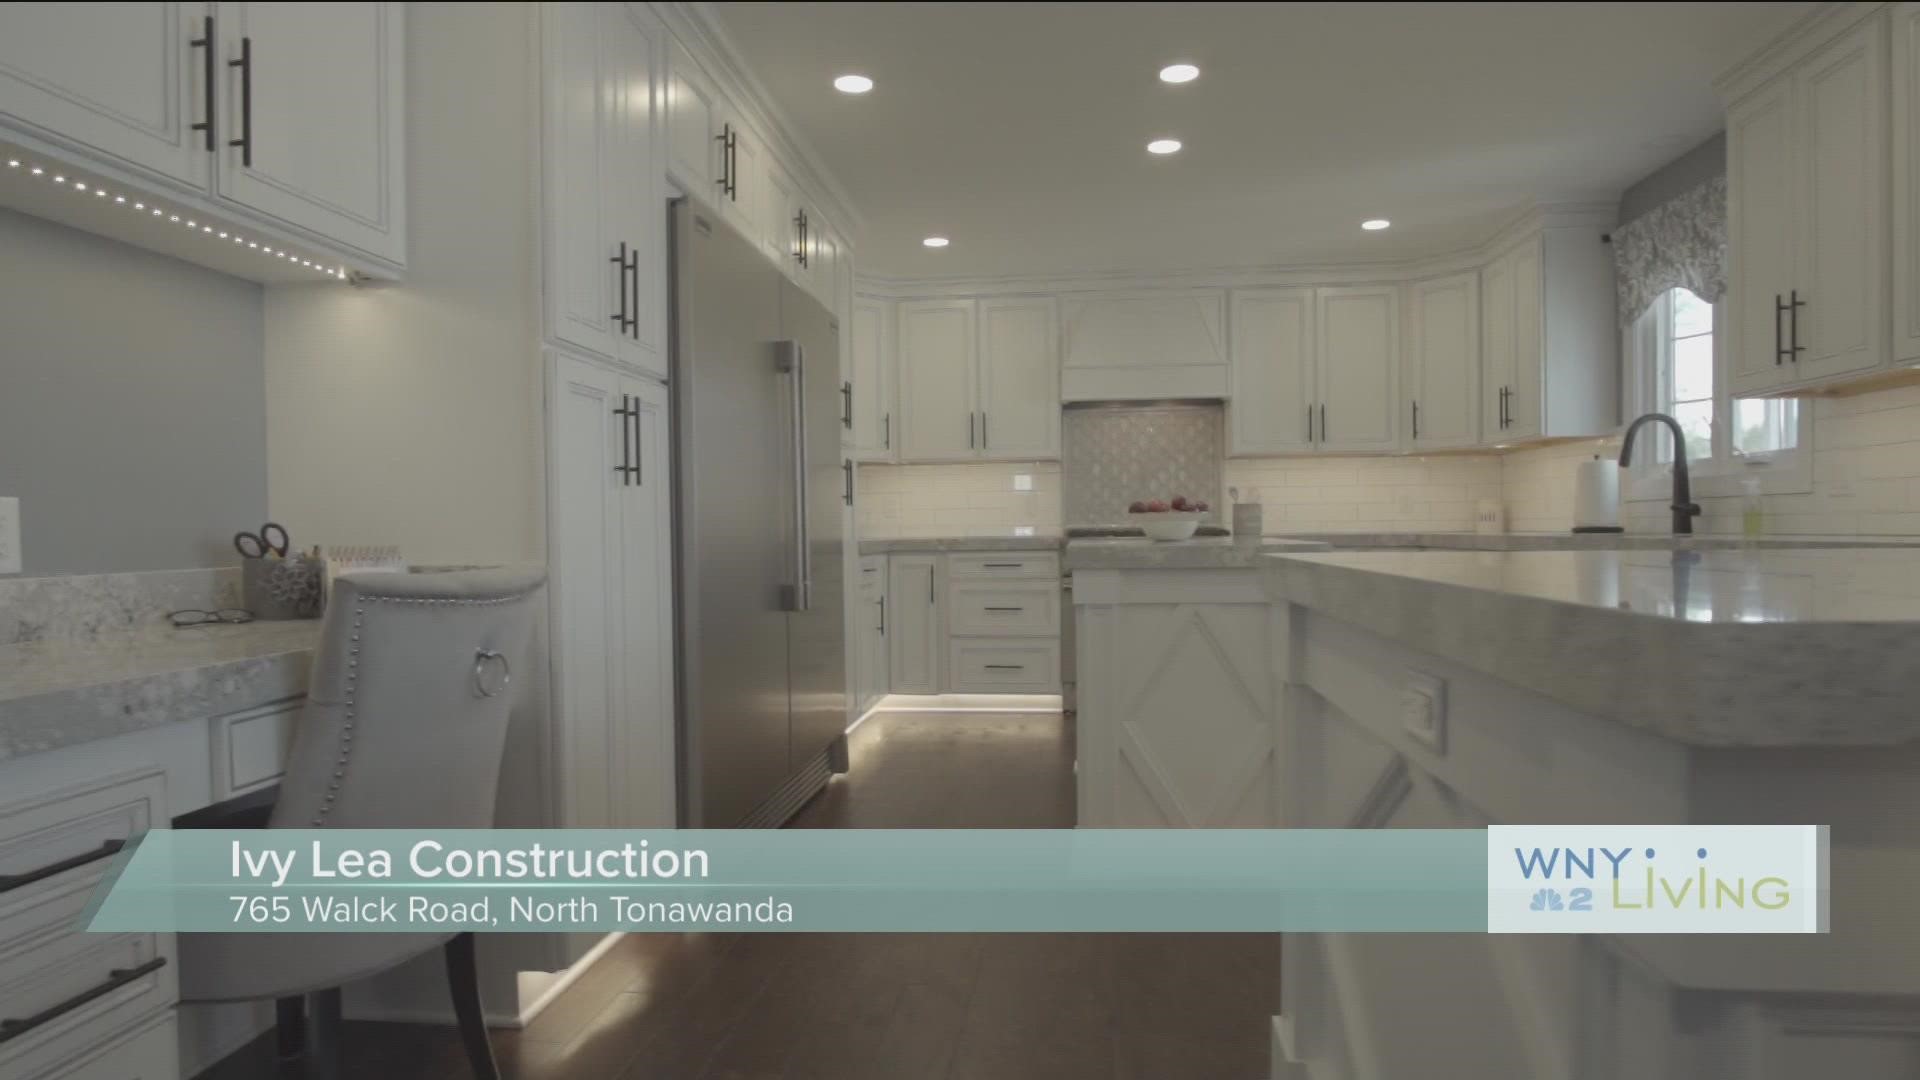 WNY Living - November 19 - Ivy Lea Construction (THIS VIDEO IS SPONSORED BY IVY LEA CONSTRUCTION)